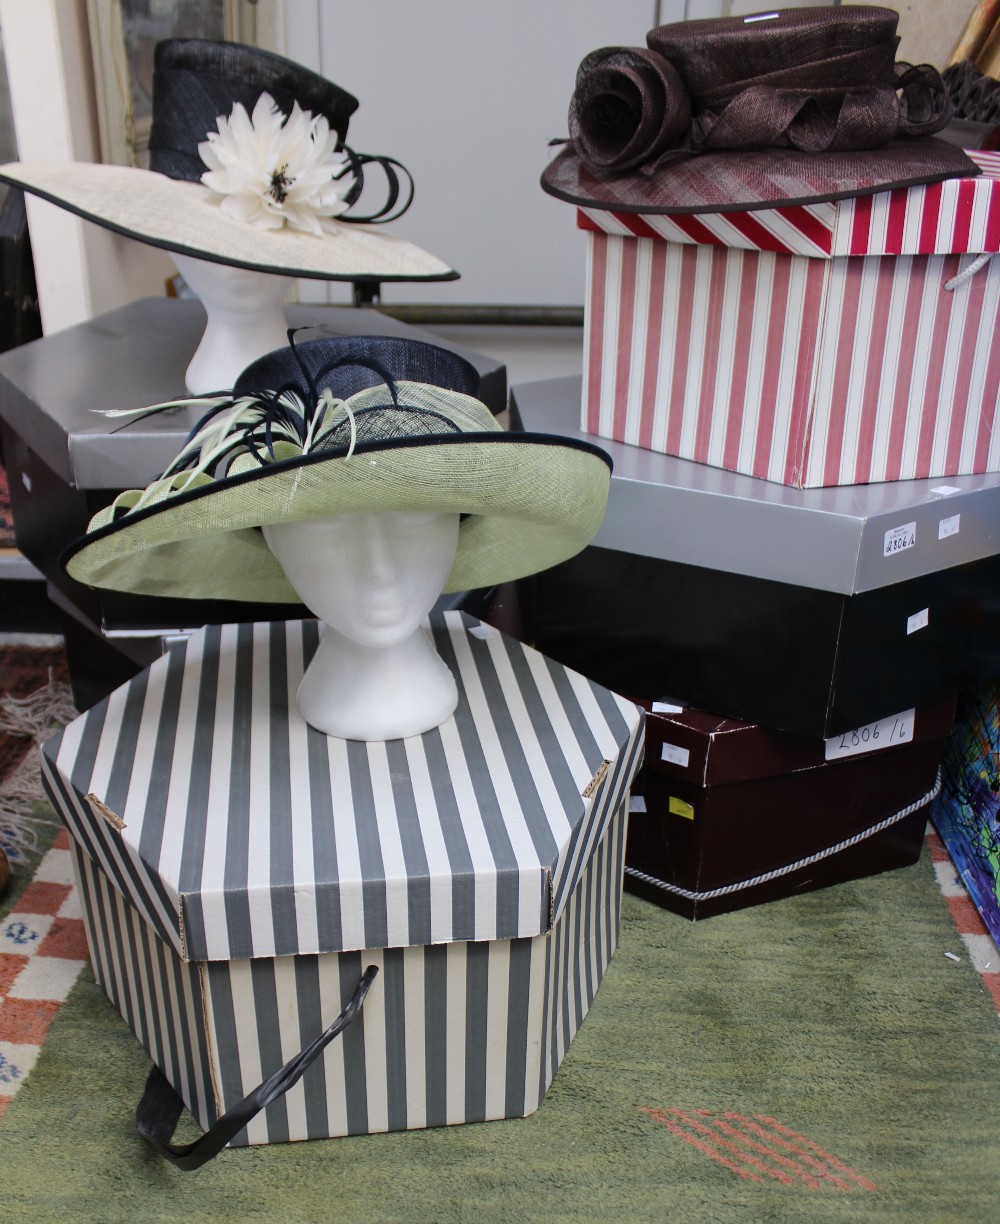 Six ladies' hats for weddings/races, all in hat boxes.